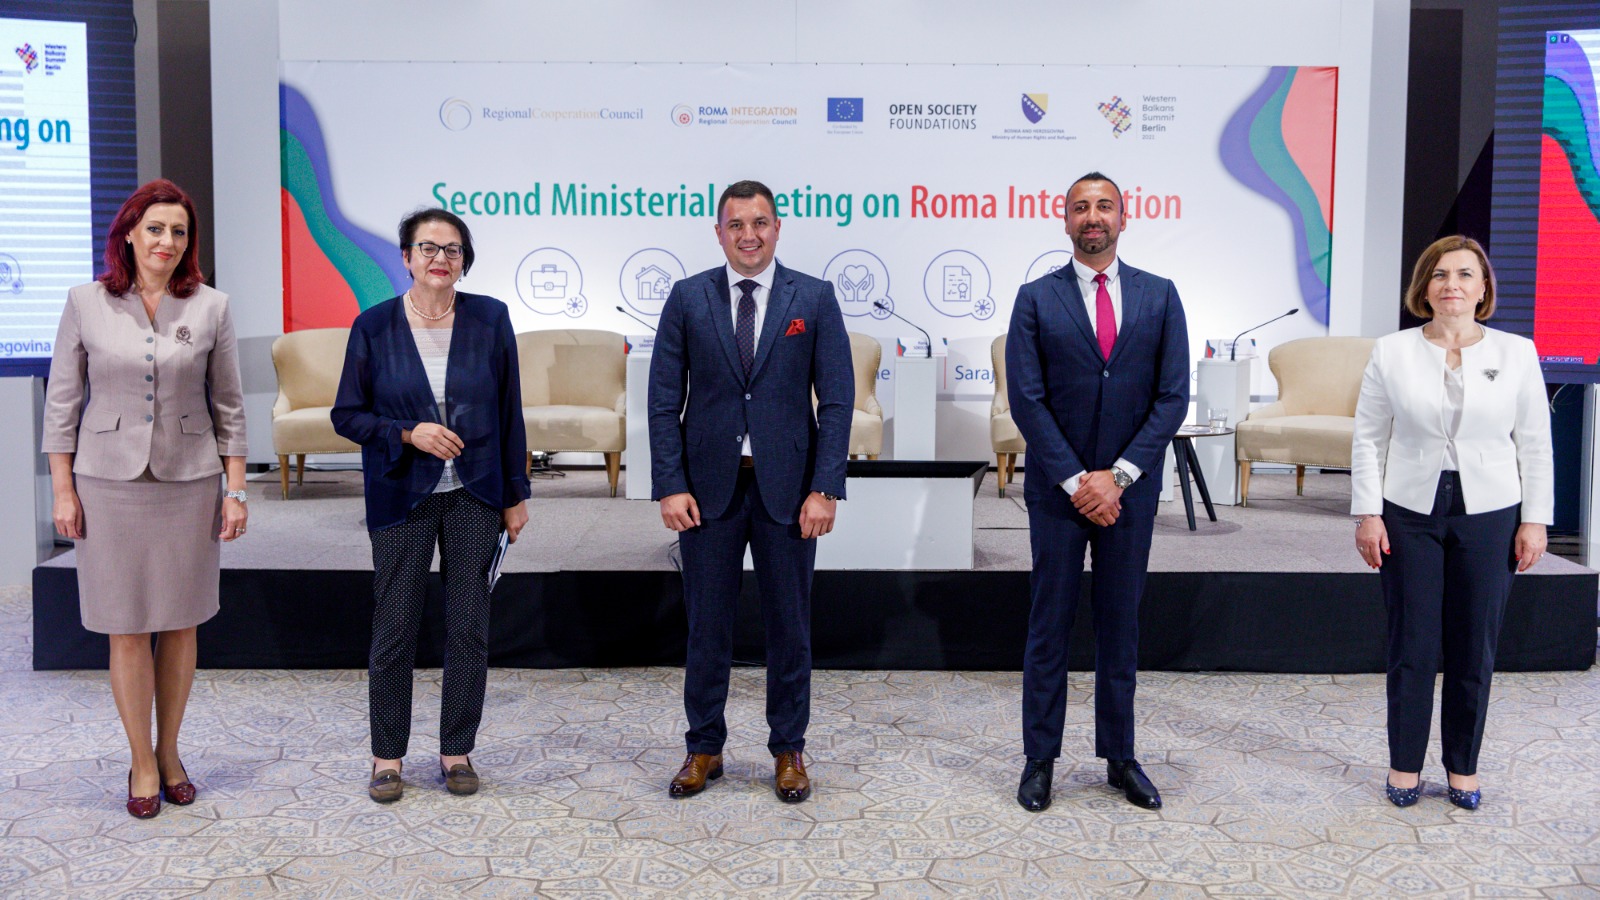 Orhan Usein, Head of Office, RCC Roma Integration with the Heads of Delegation at the Second Ministerial Meeting on Roma Integration (Photo: Armin Durgut)